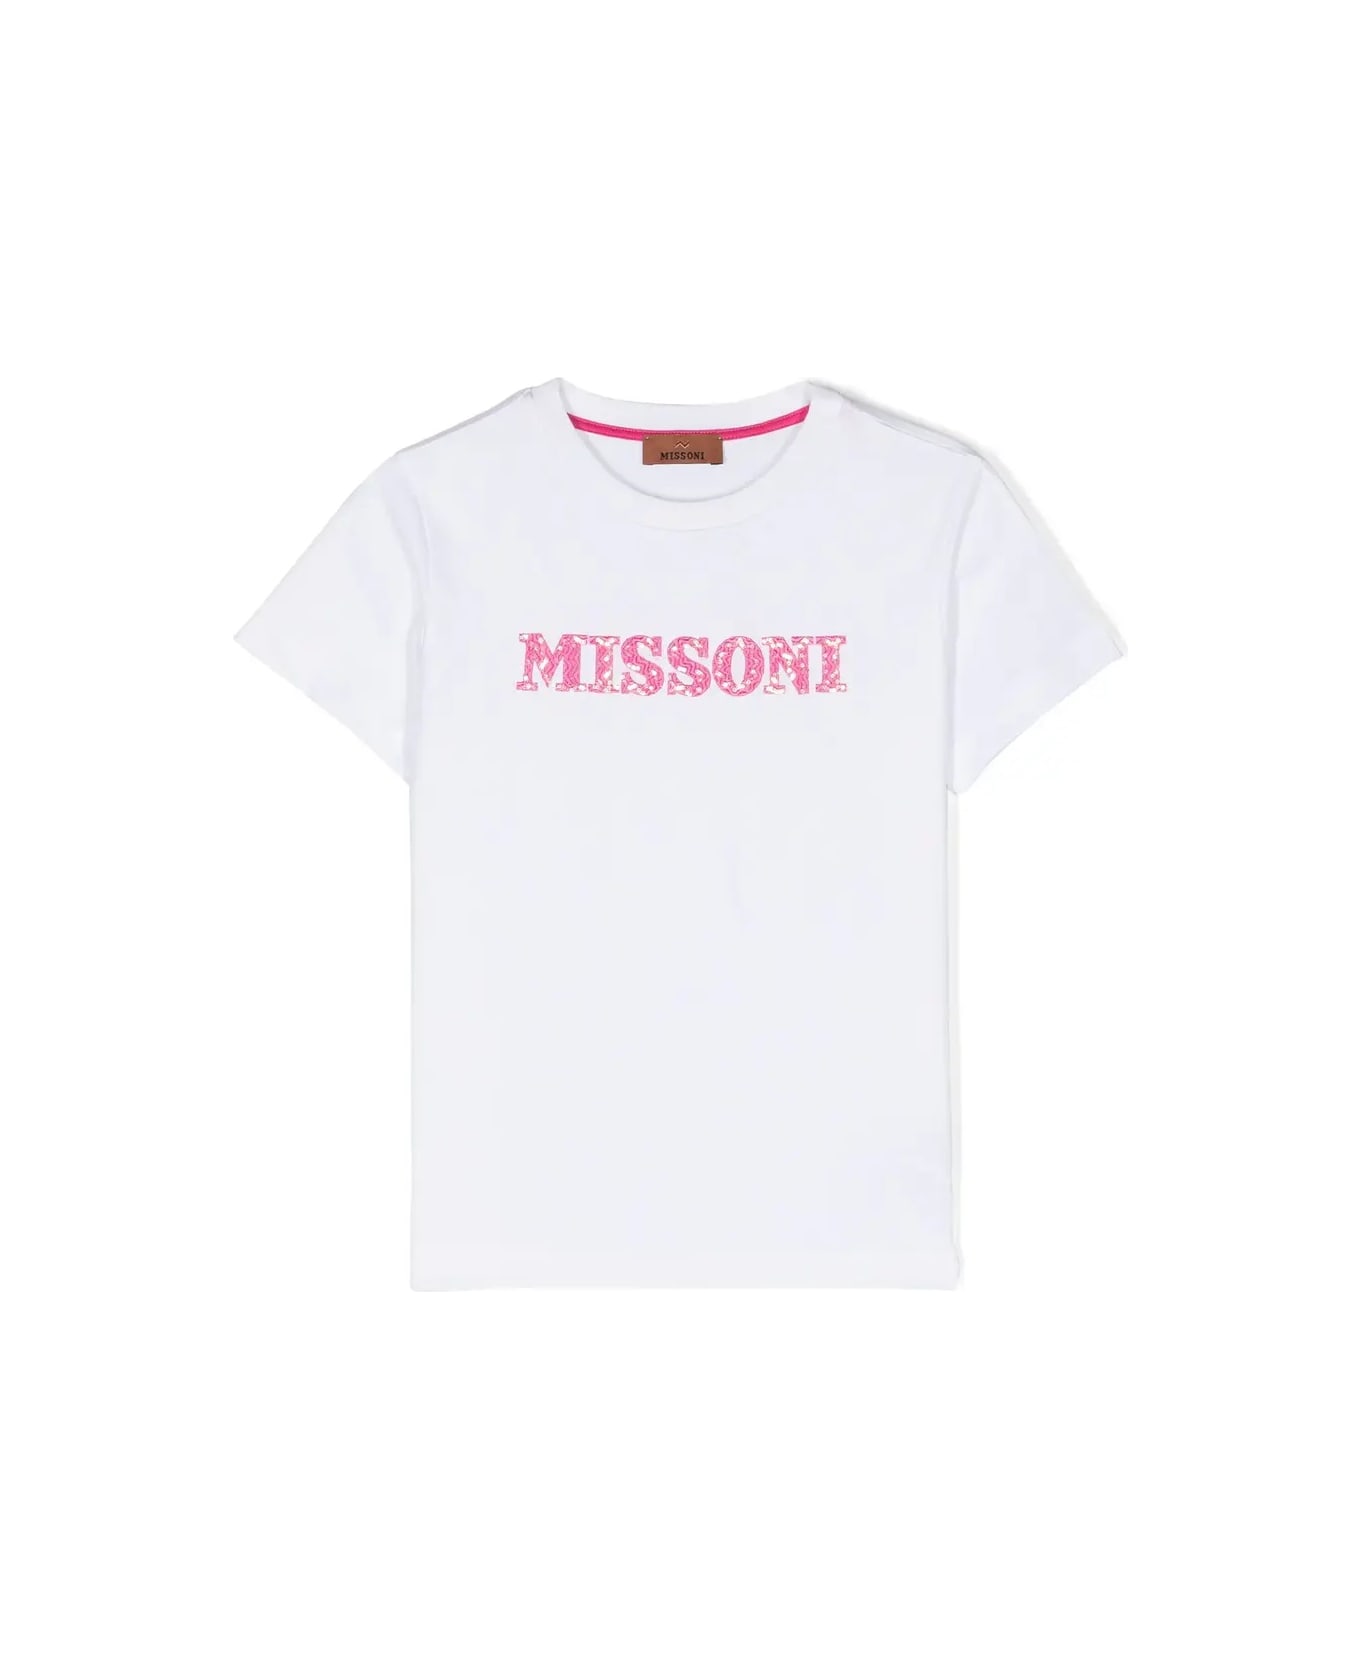 Missoni Kids White T-shirt With Pink Sequins Logo - Pink